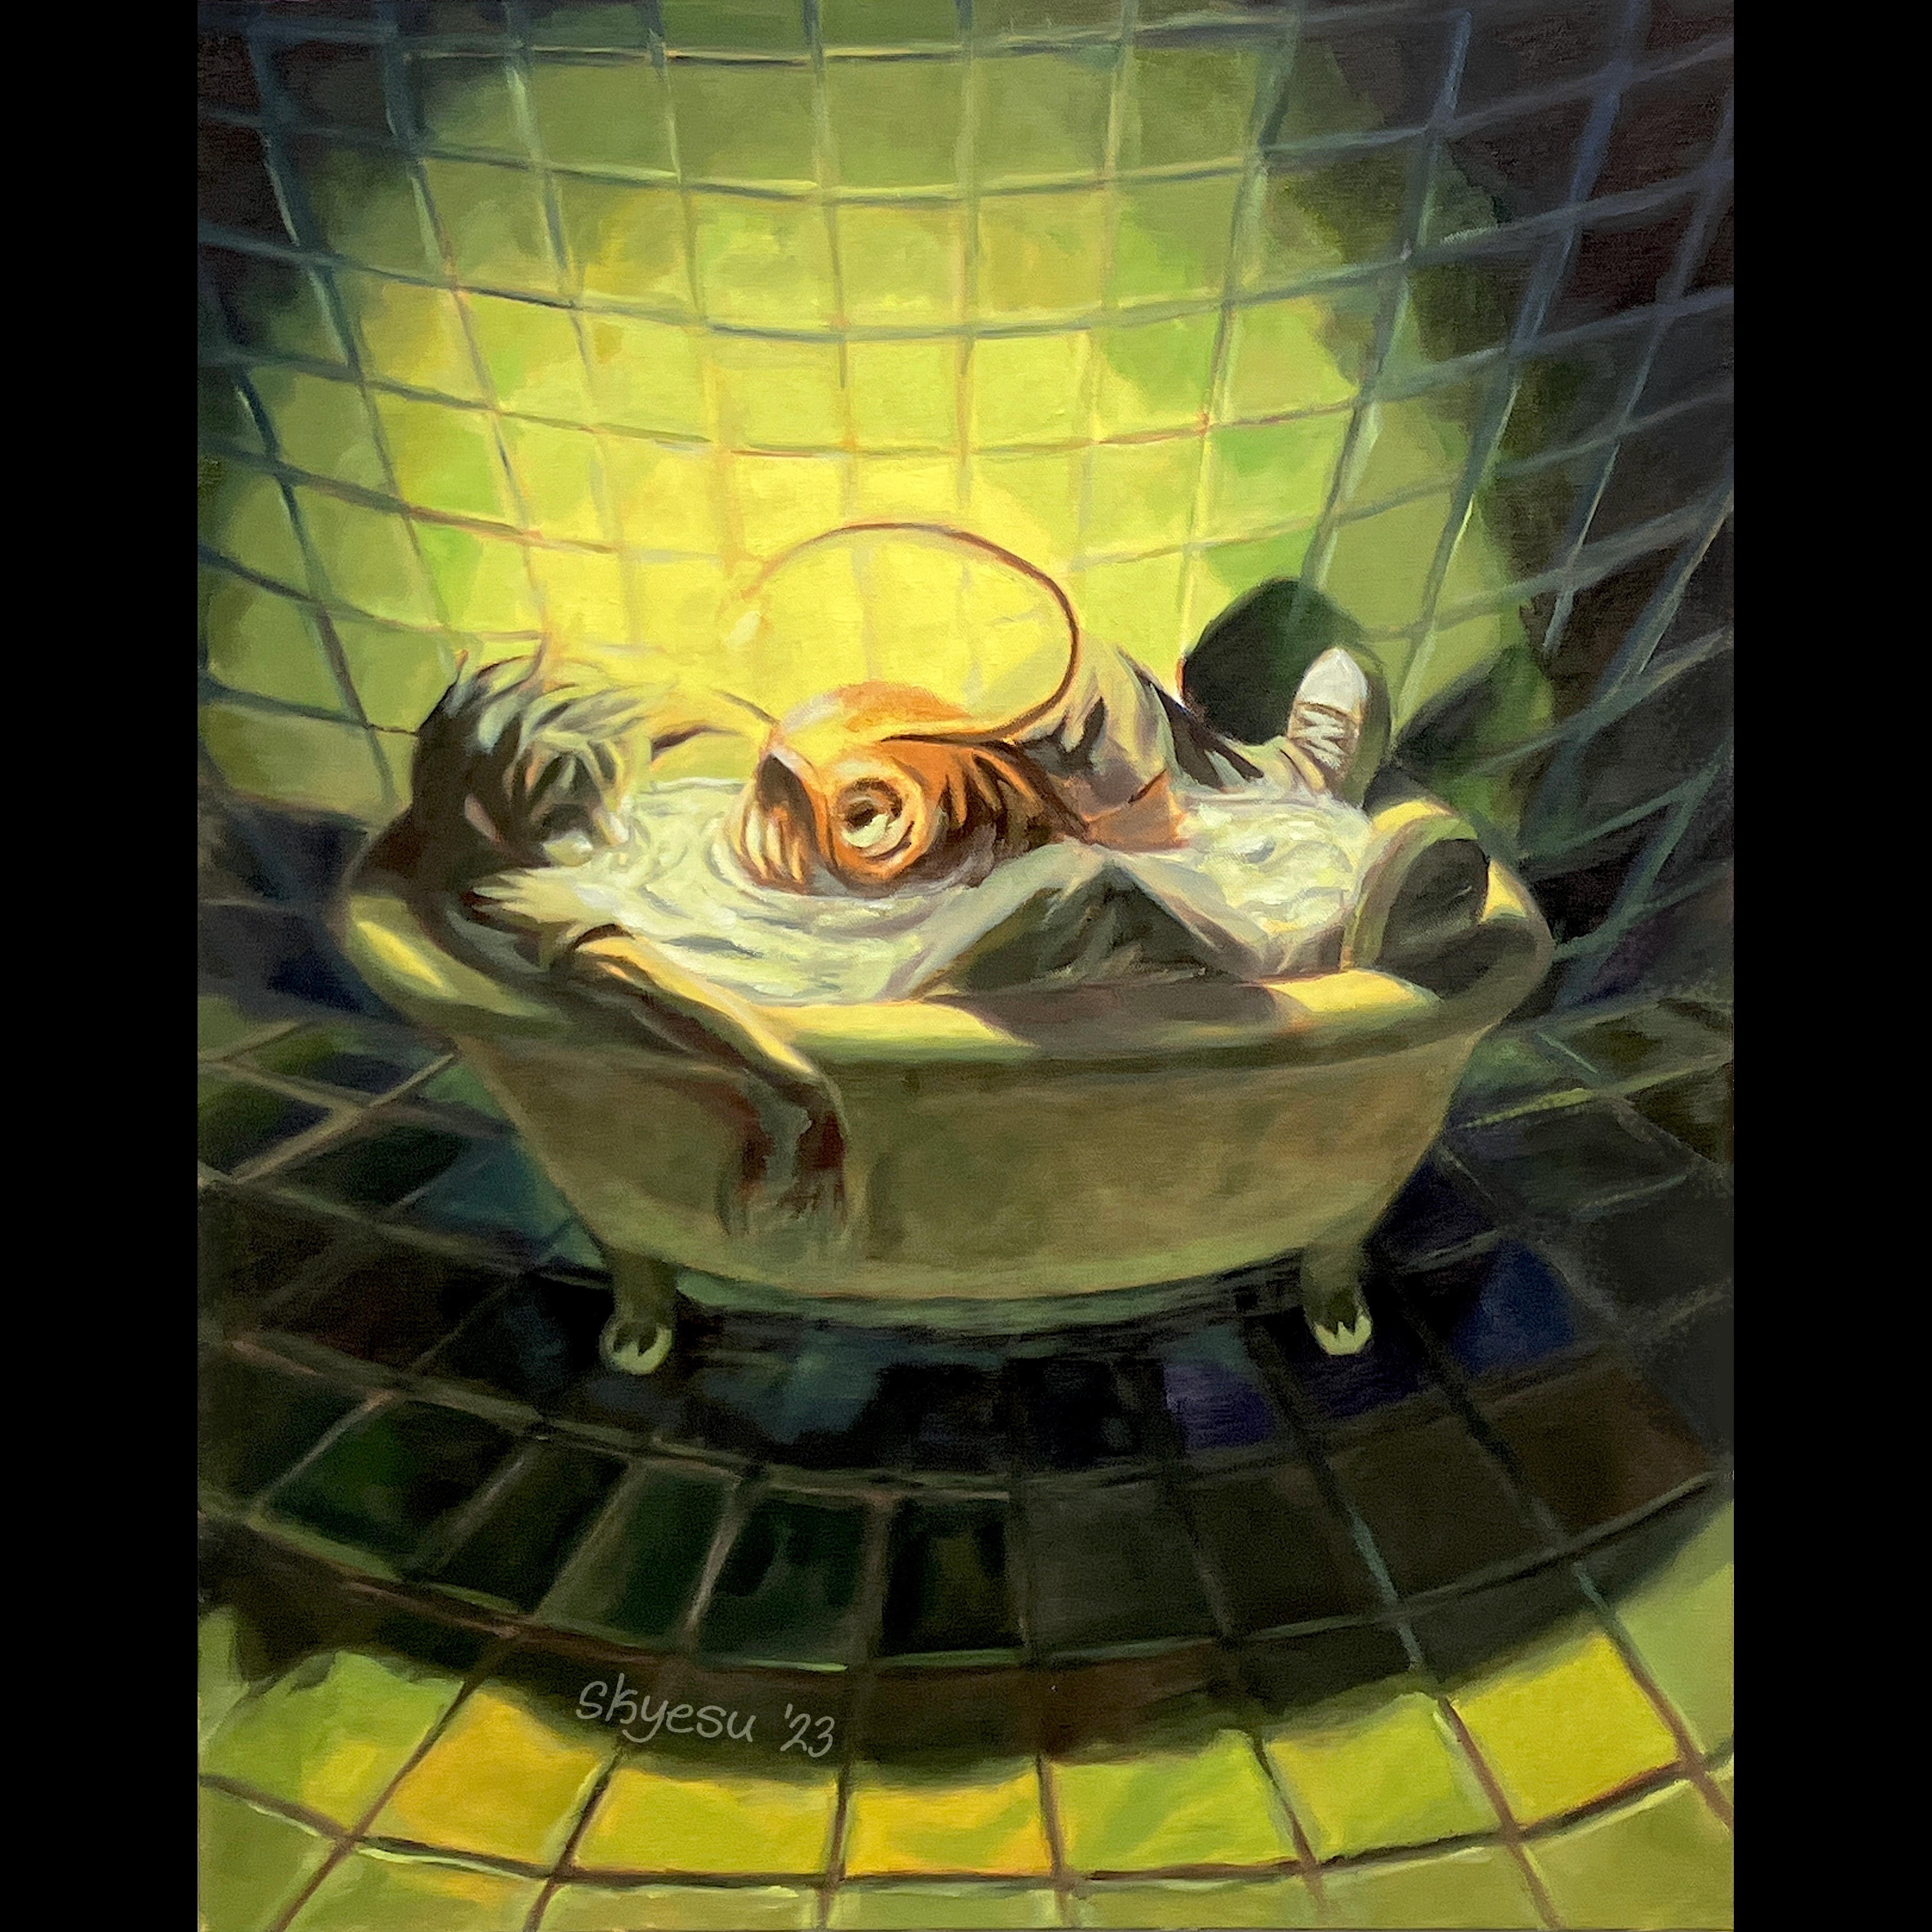 green-tinted oil painting of a dark-lit bathroom. there is a person in a bathtub with a large angler fish in the water with them, the fish's lime-yellow light illuminating the tiles